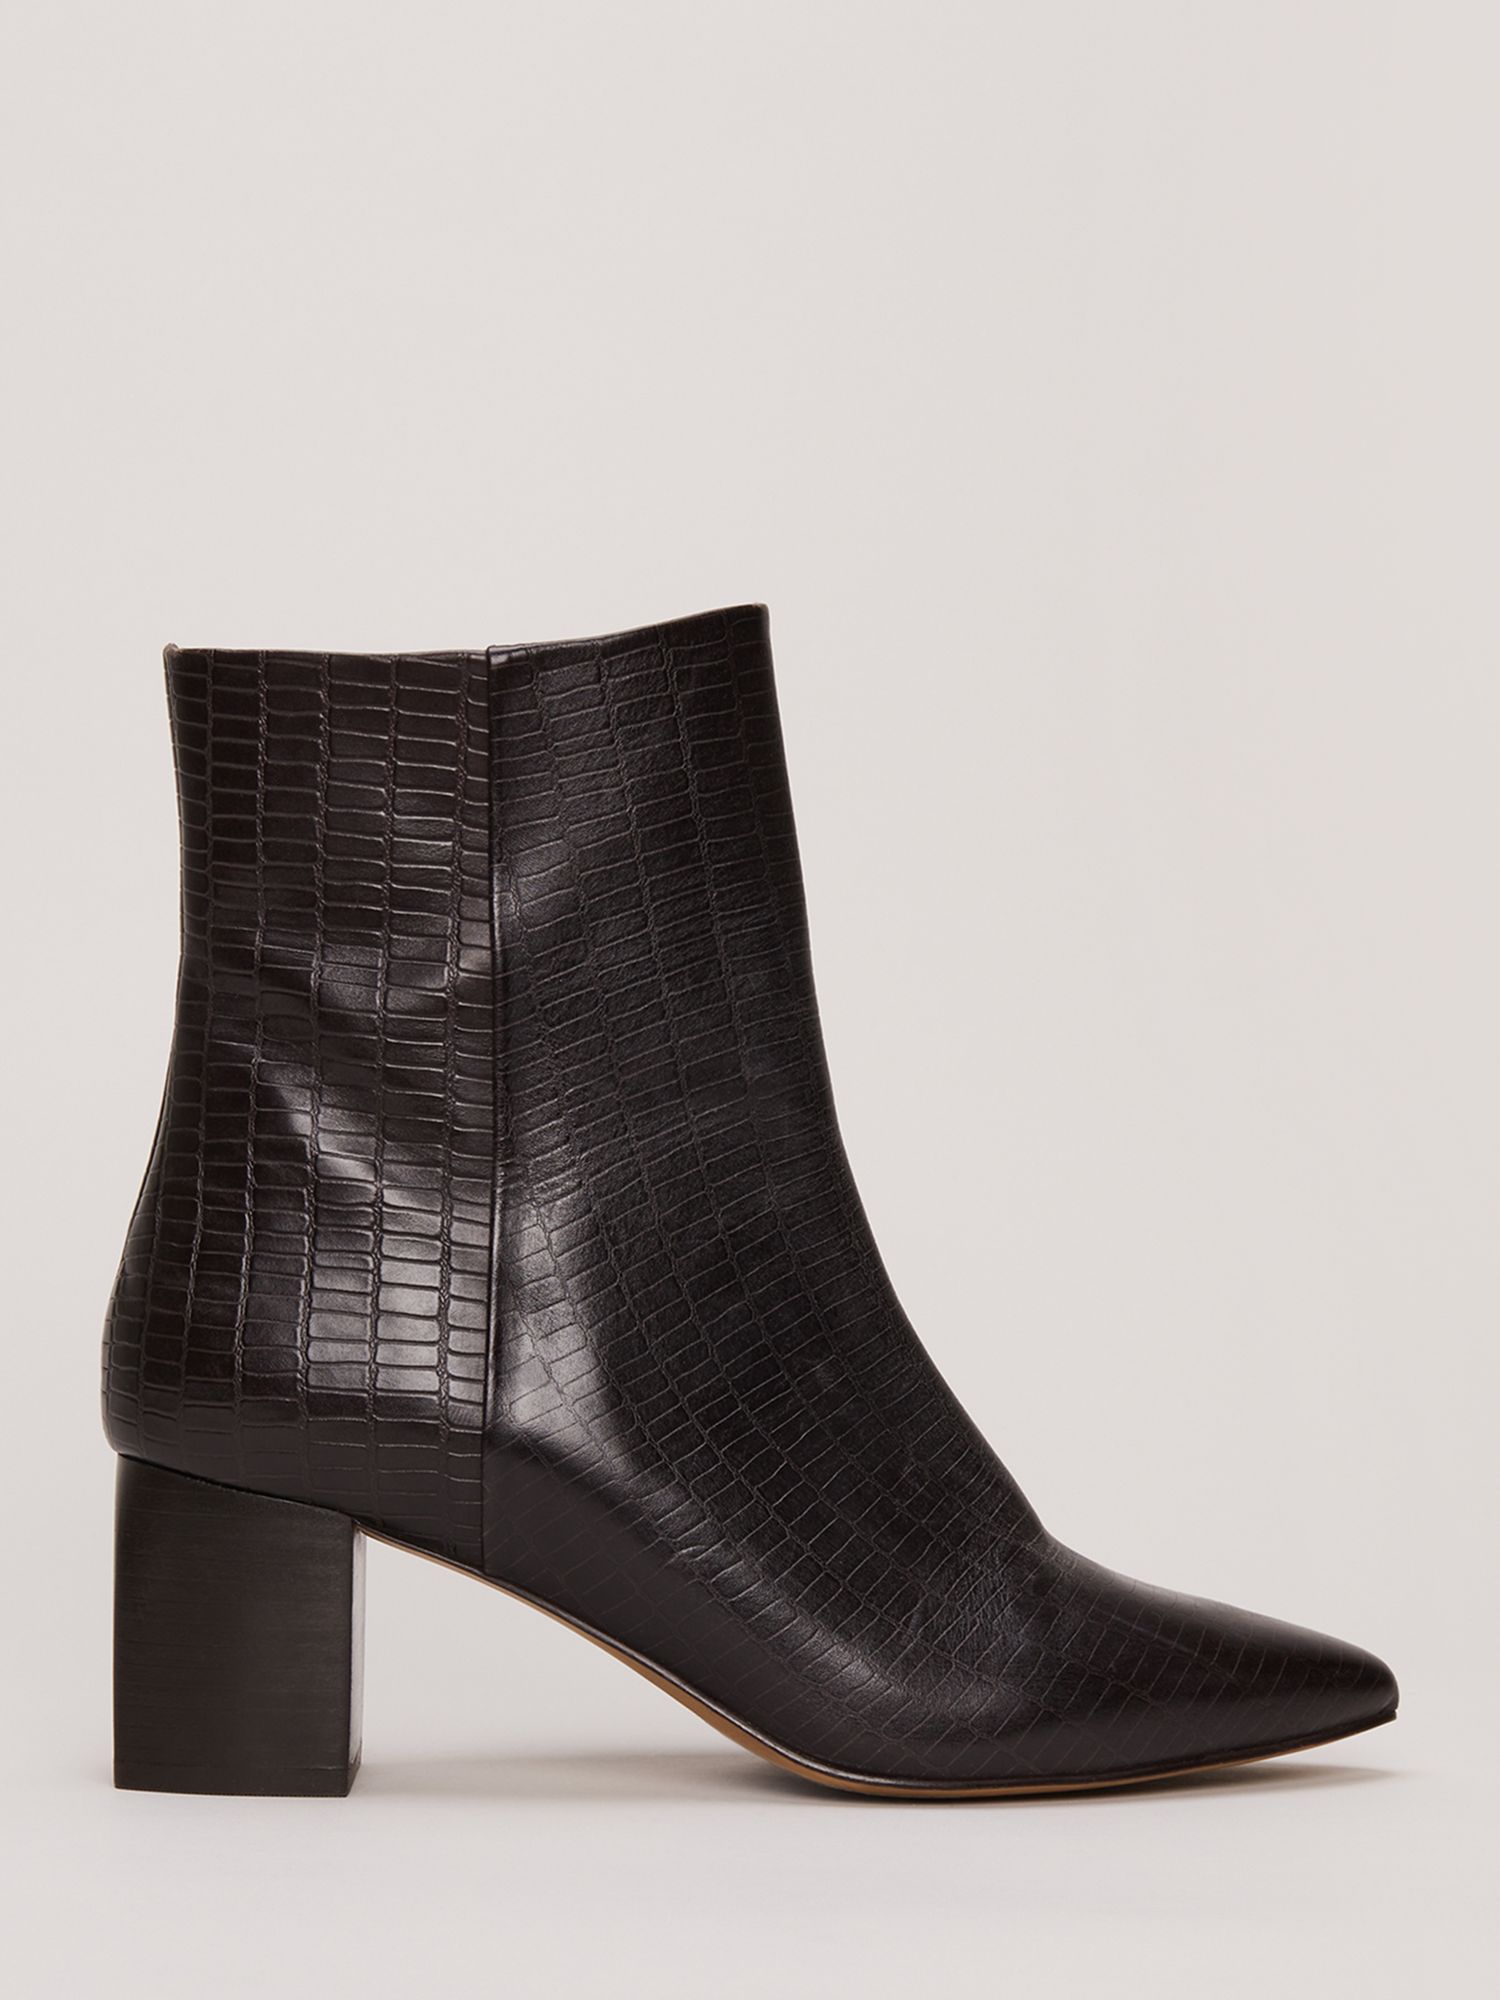 Mango Leather Ankle Boots, Black at John Lewis & Partners